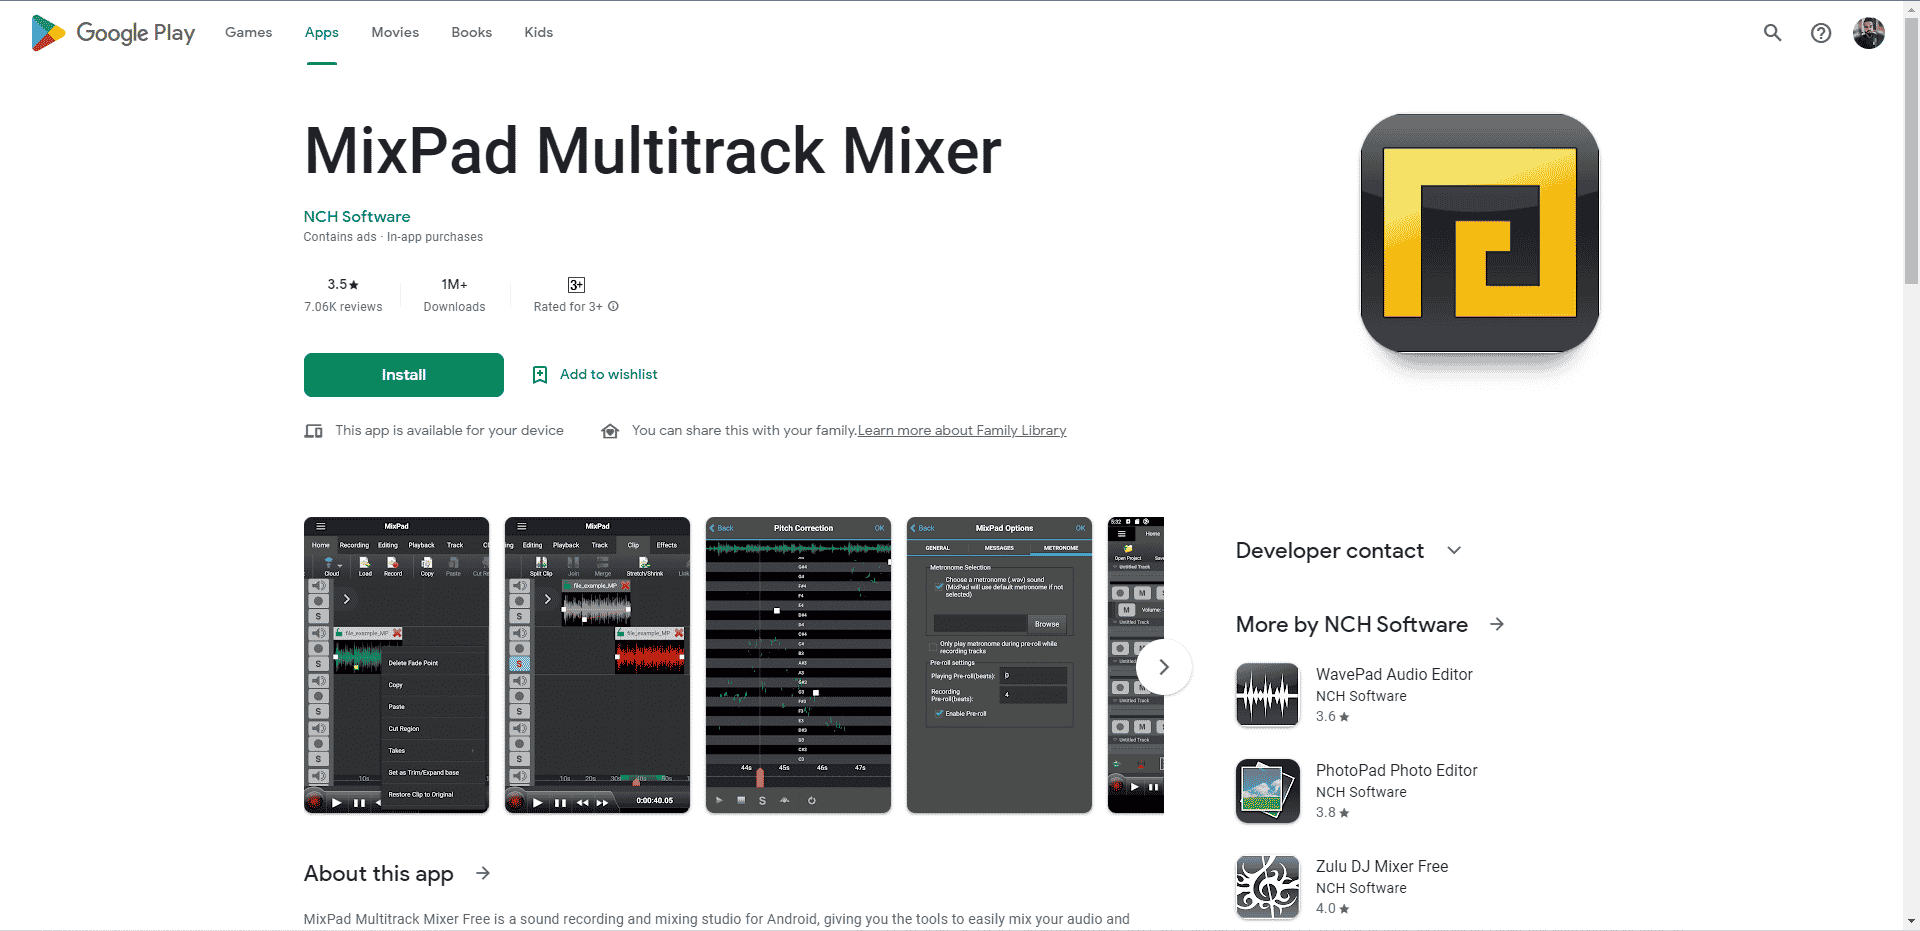 MixPad Multitrack Mixer Play Store webpage. Best Free Audio Editing Apps for Android